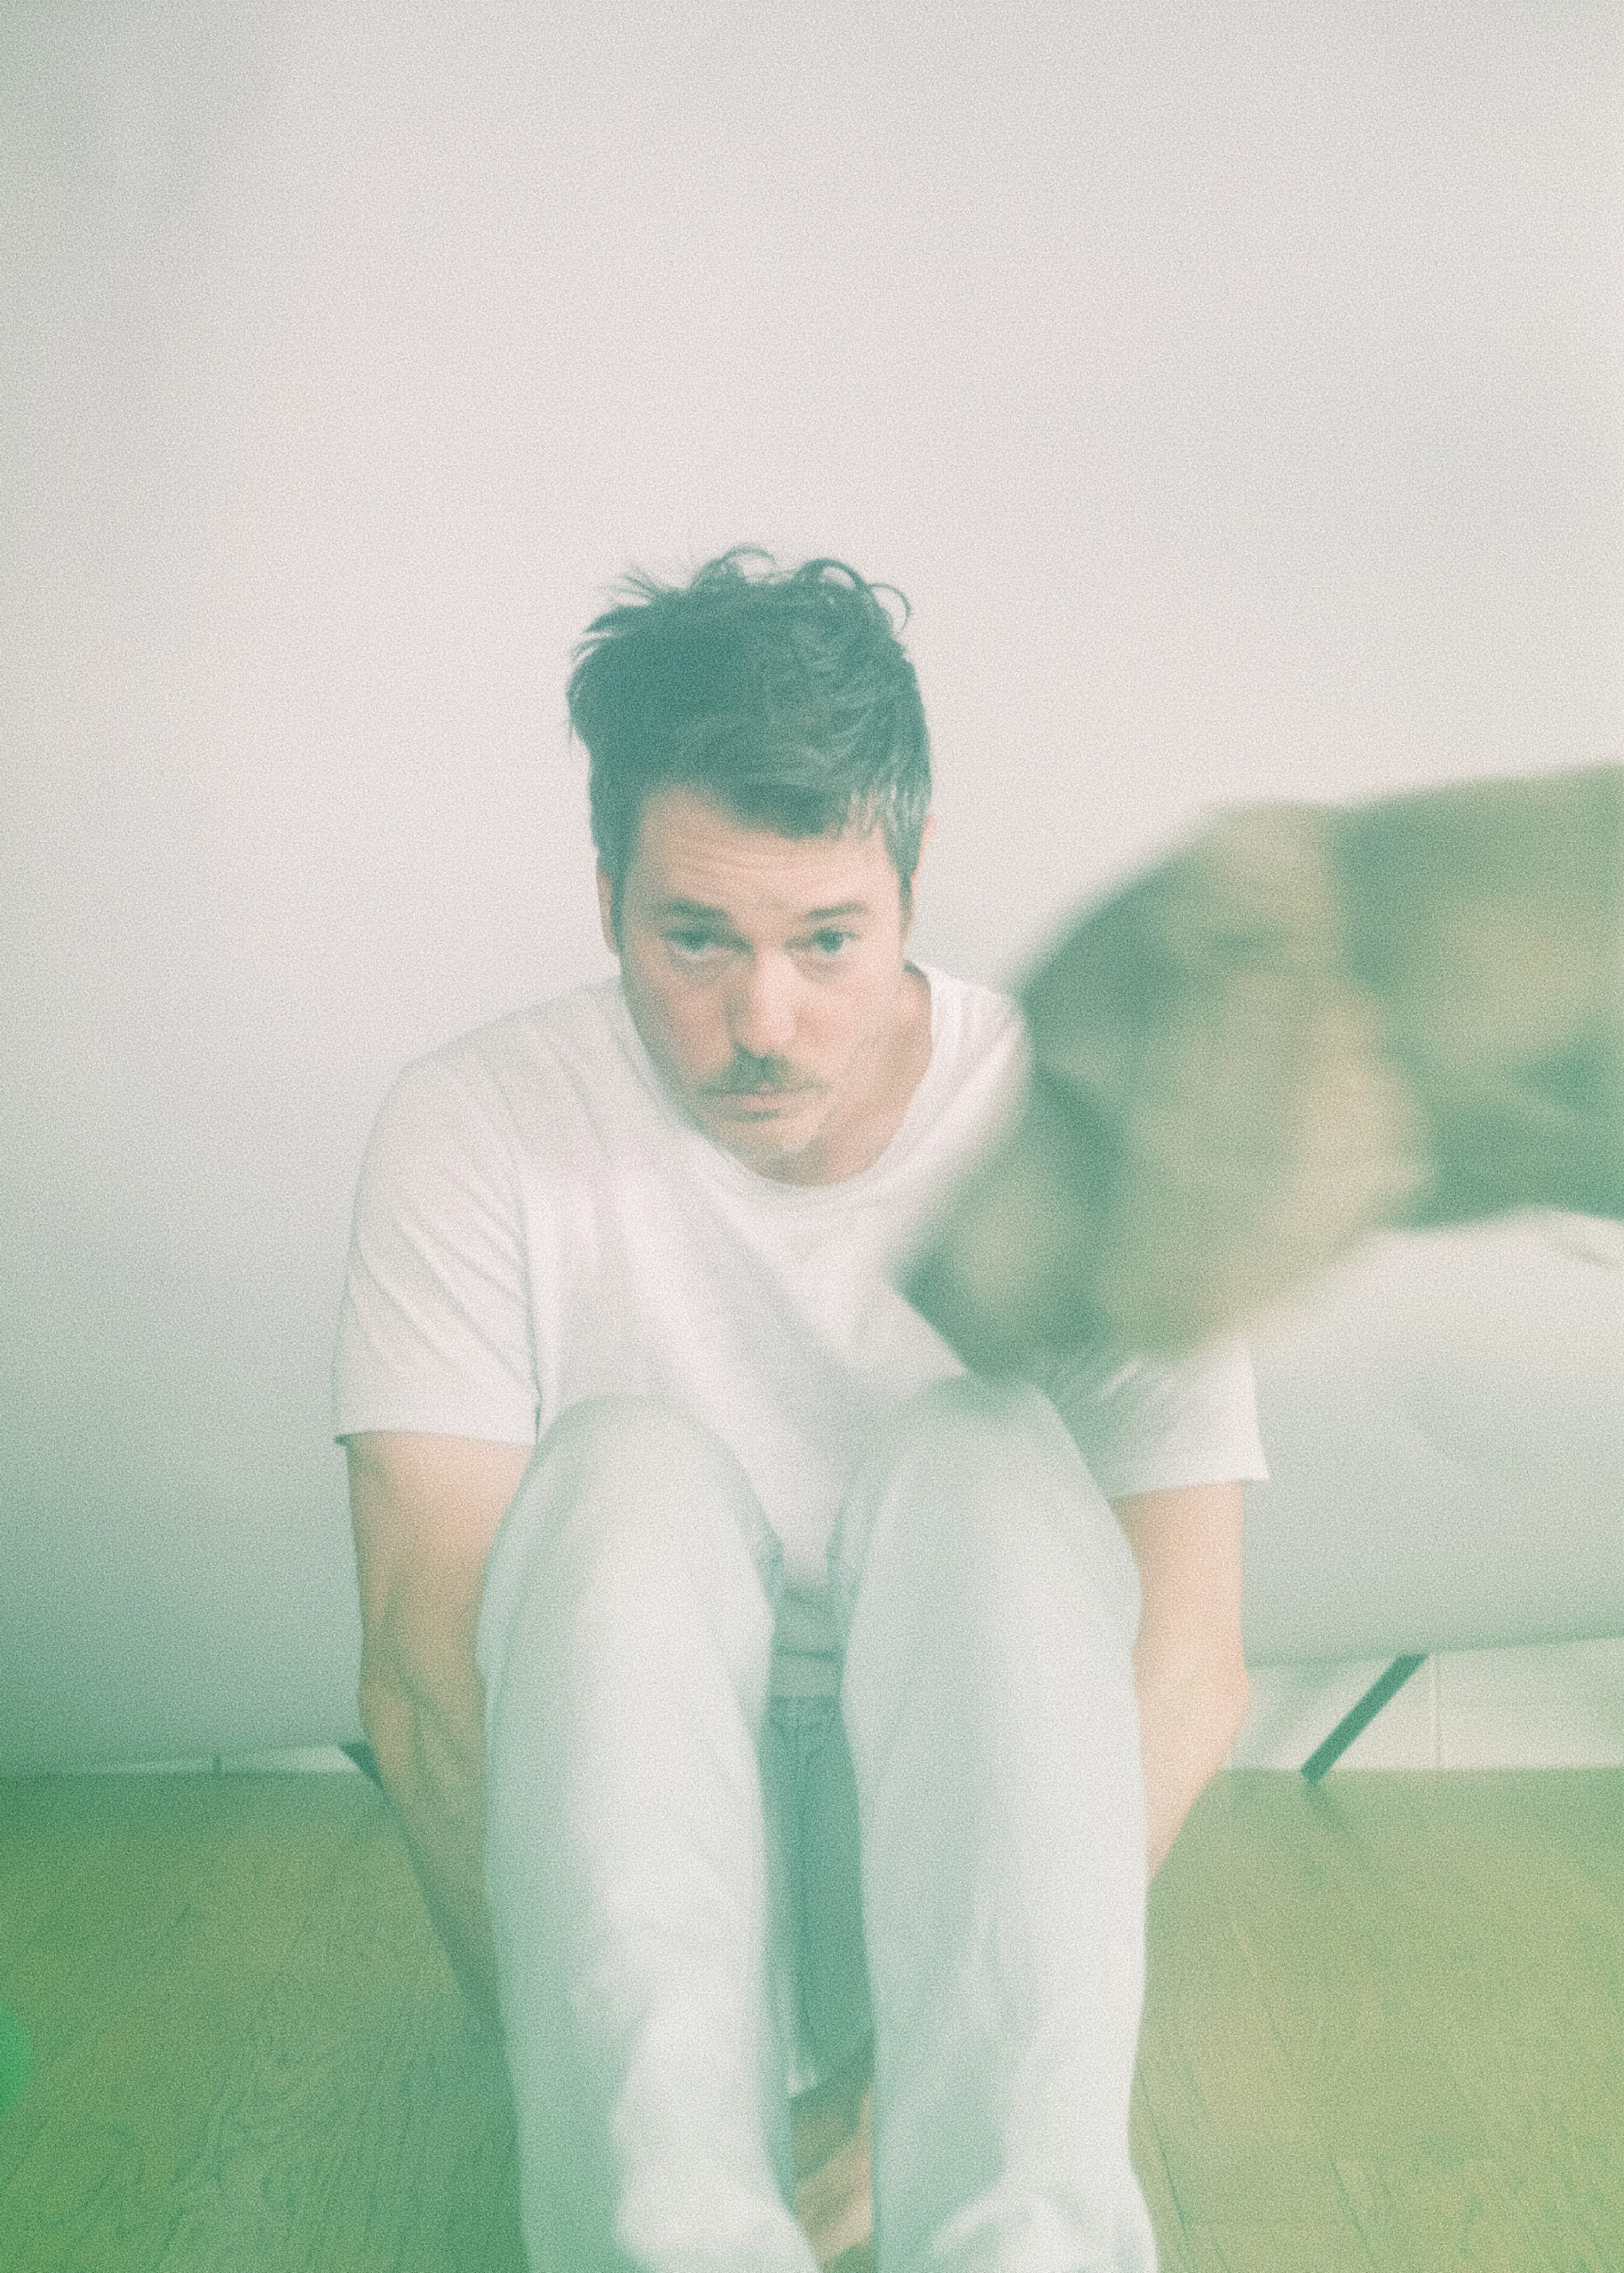 LA’s Paper Pools announces debut EP, shares “Turn On Your Lights”